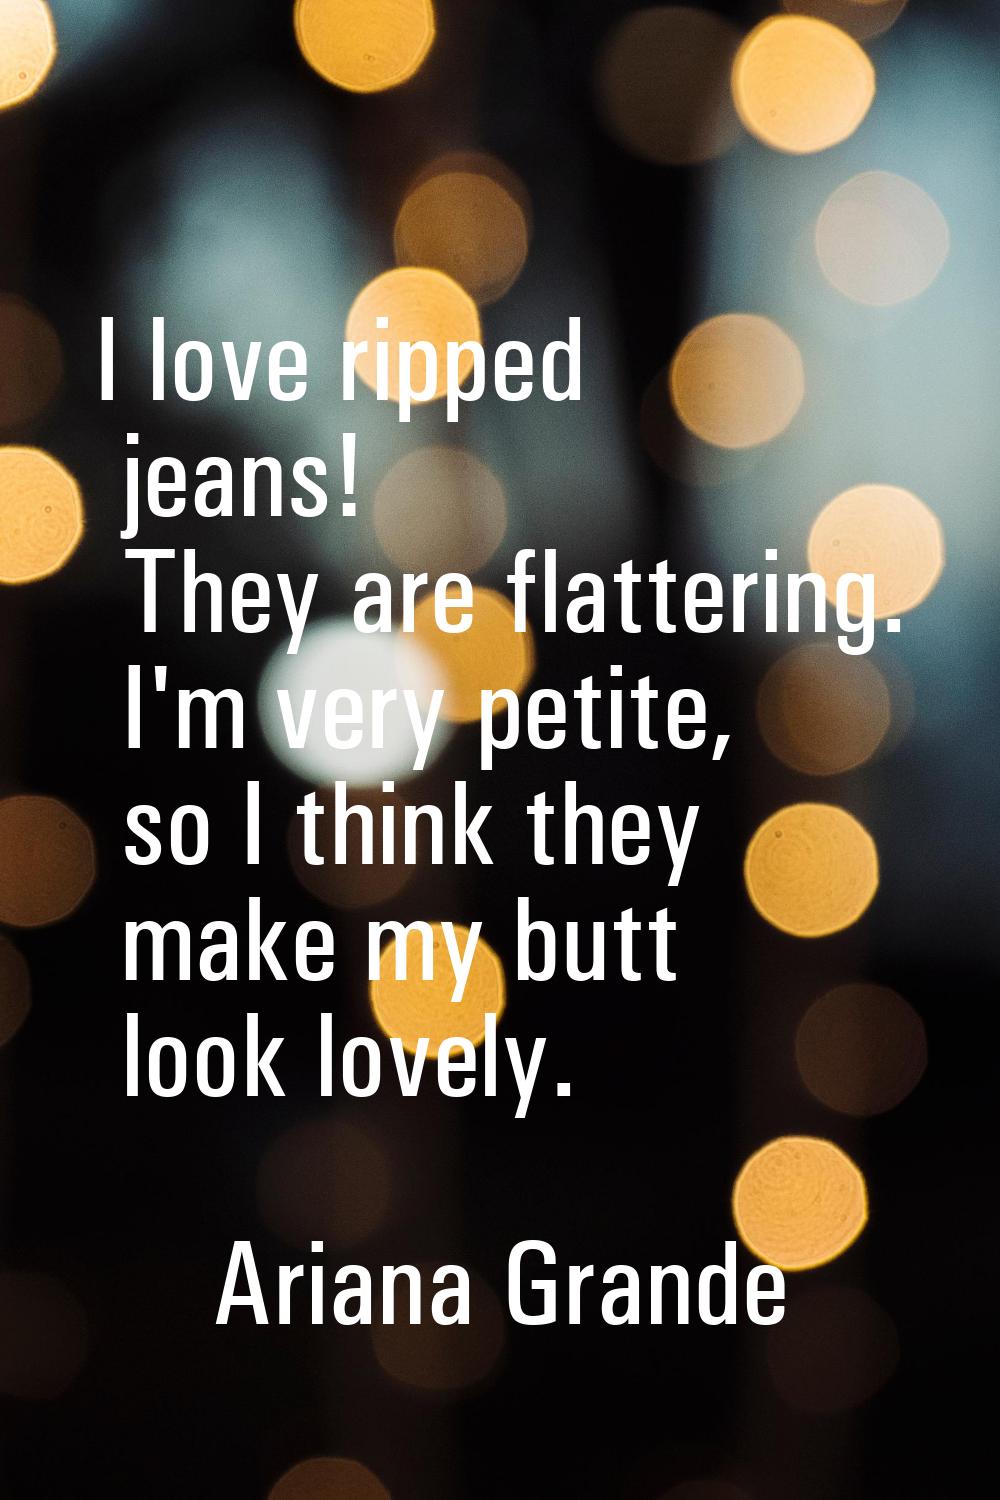 I love ripped jeans! They are flattering. I'm very petite, so I think they make my butt look lovely